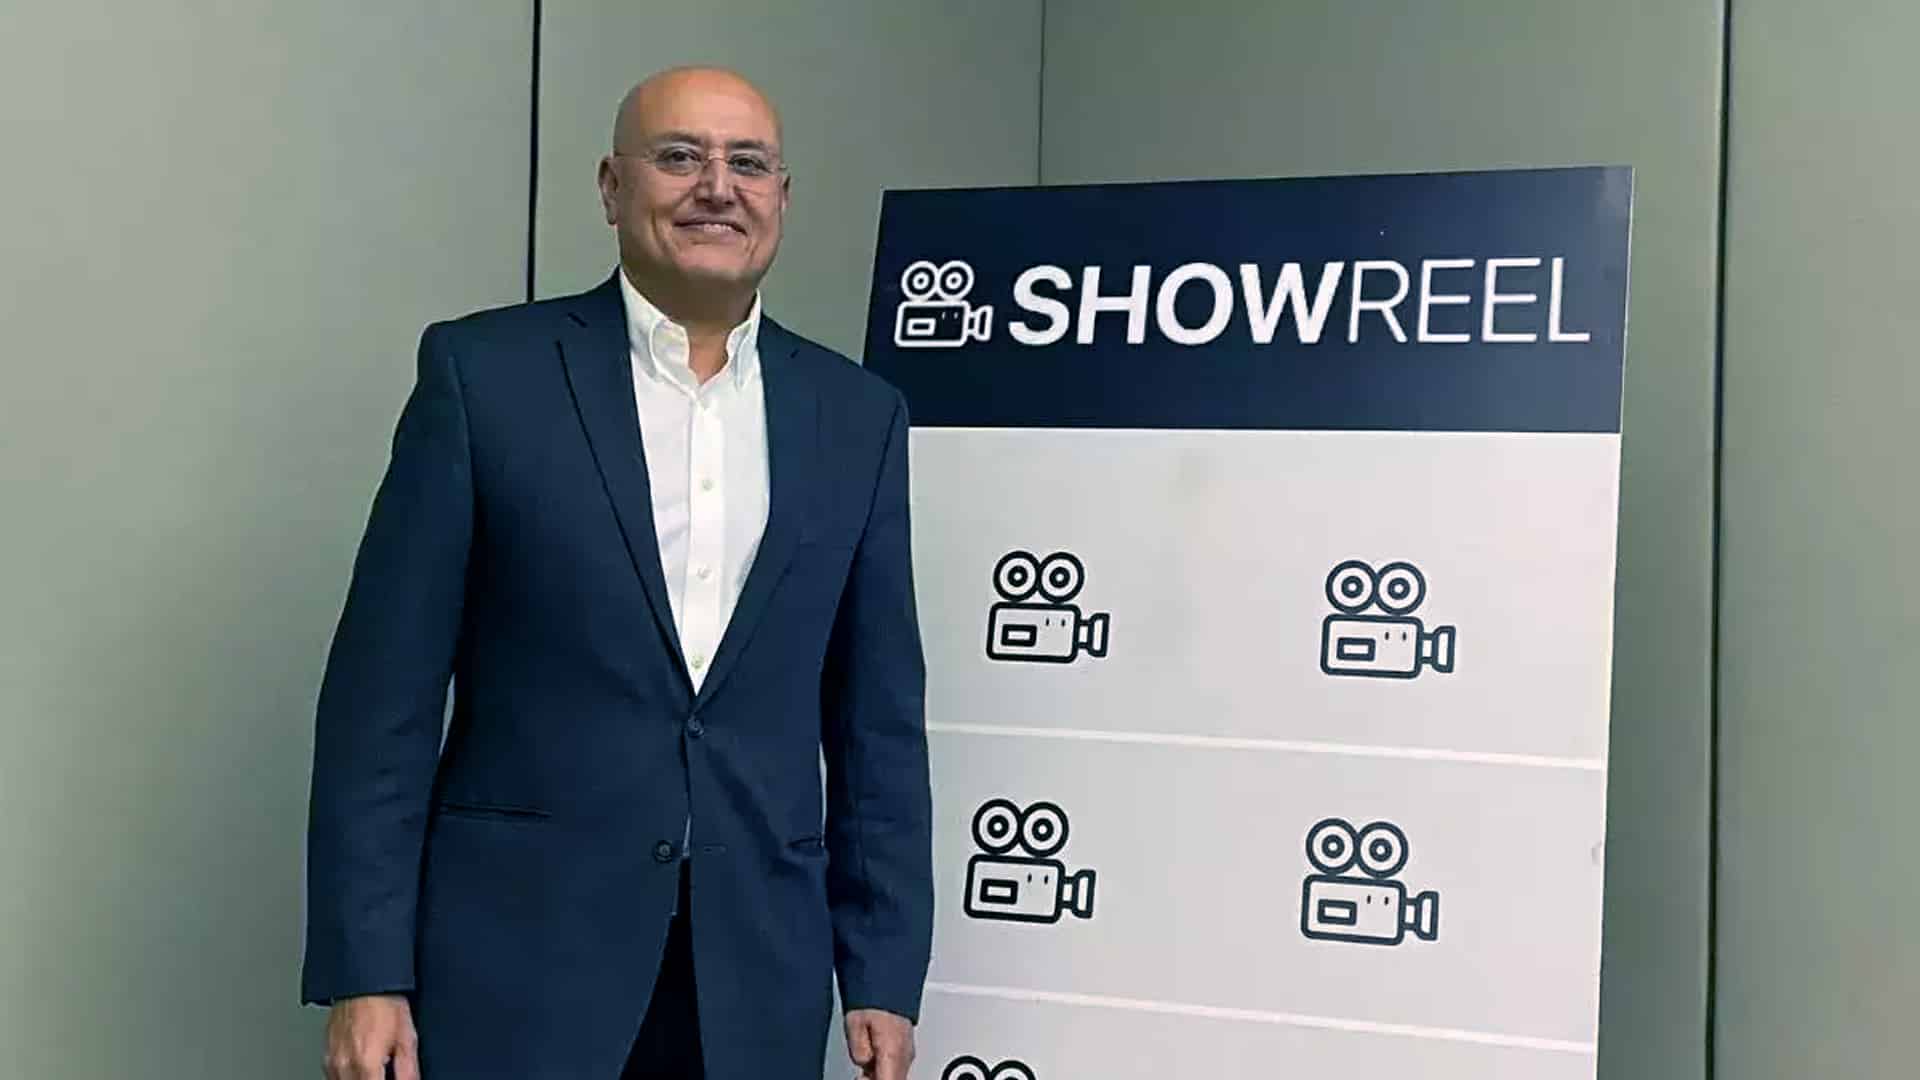 Sabeer Bhatia launches video messaging platform ShowReel aims to enable job opportunities